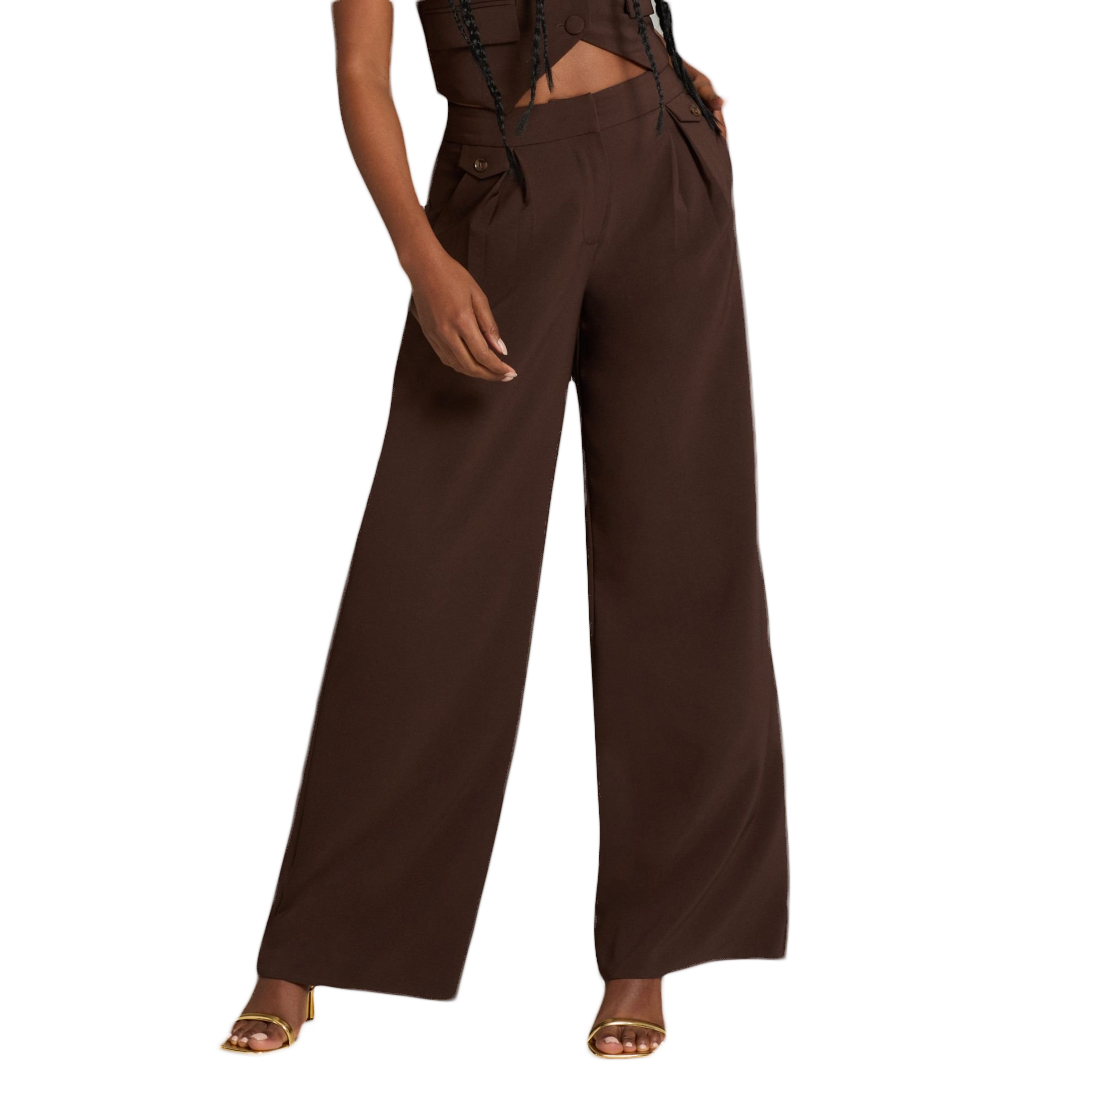 Women's High-waisted Trousers